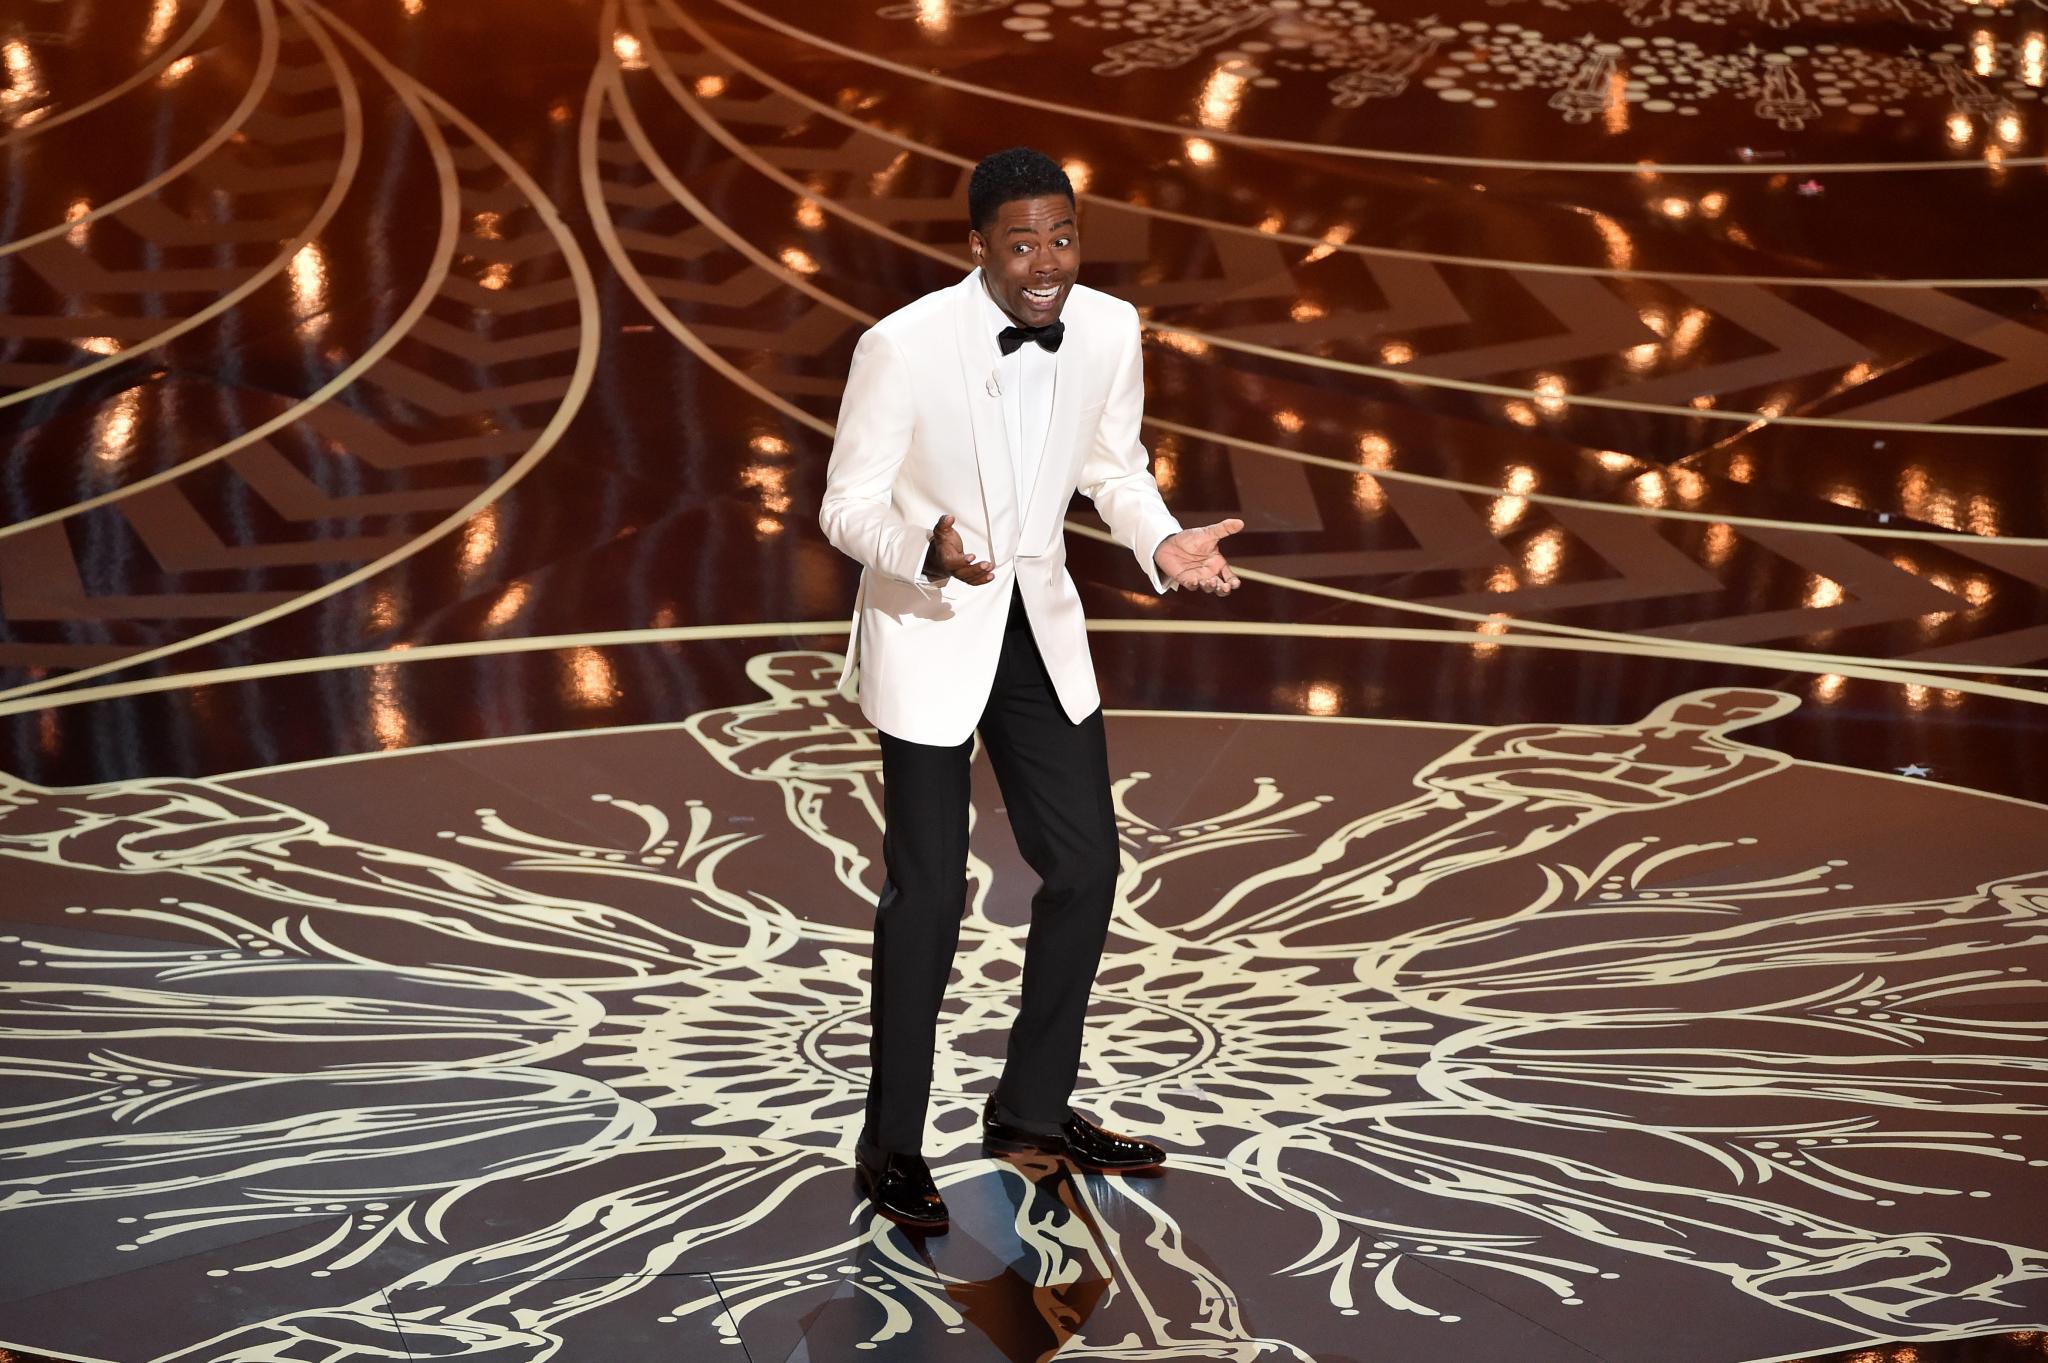 15 Lines From Chris Rock's Oscars Monologue That Got Us Talking